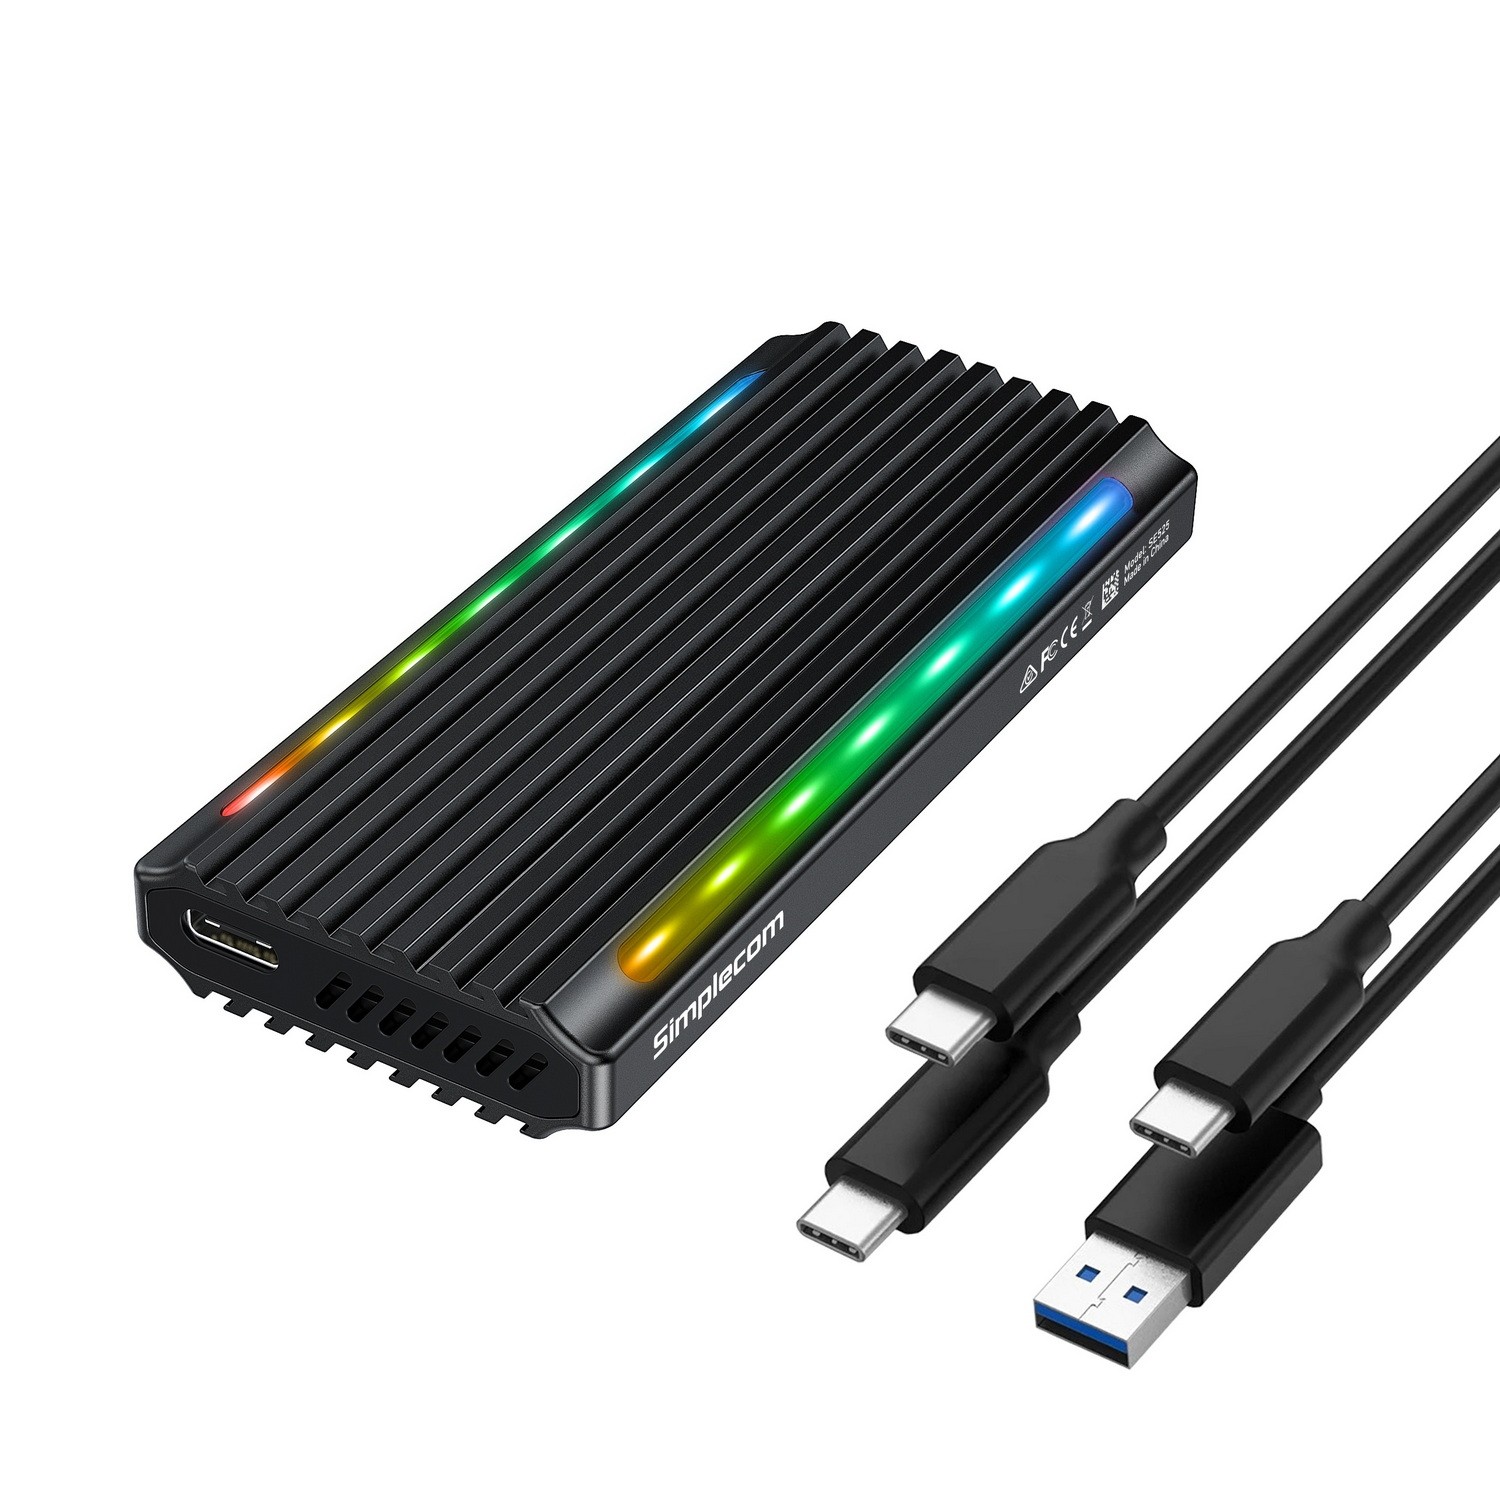  Dual Protocol support for both NVMe / SATA M.2 SSD USB-C Enclosure with RGB Light USB 3.2 Gen 2 10Gbps  